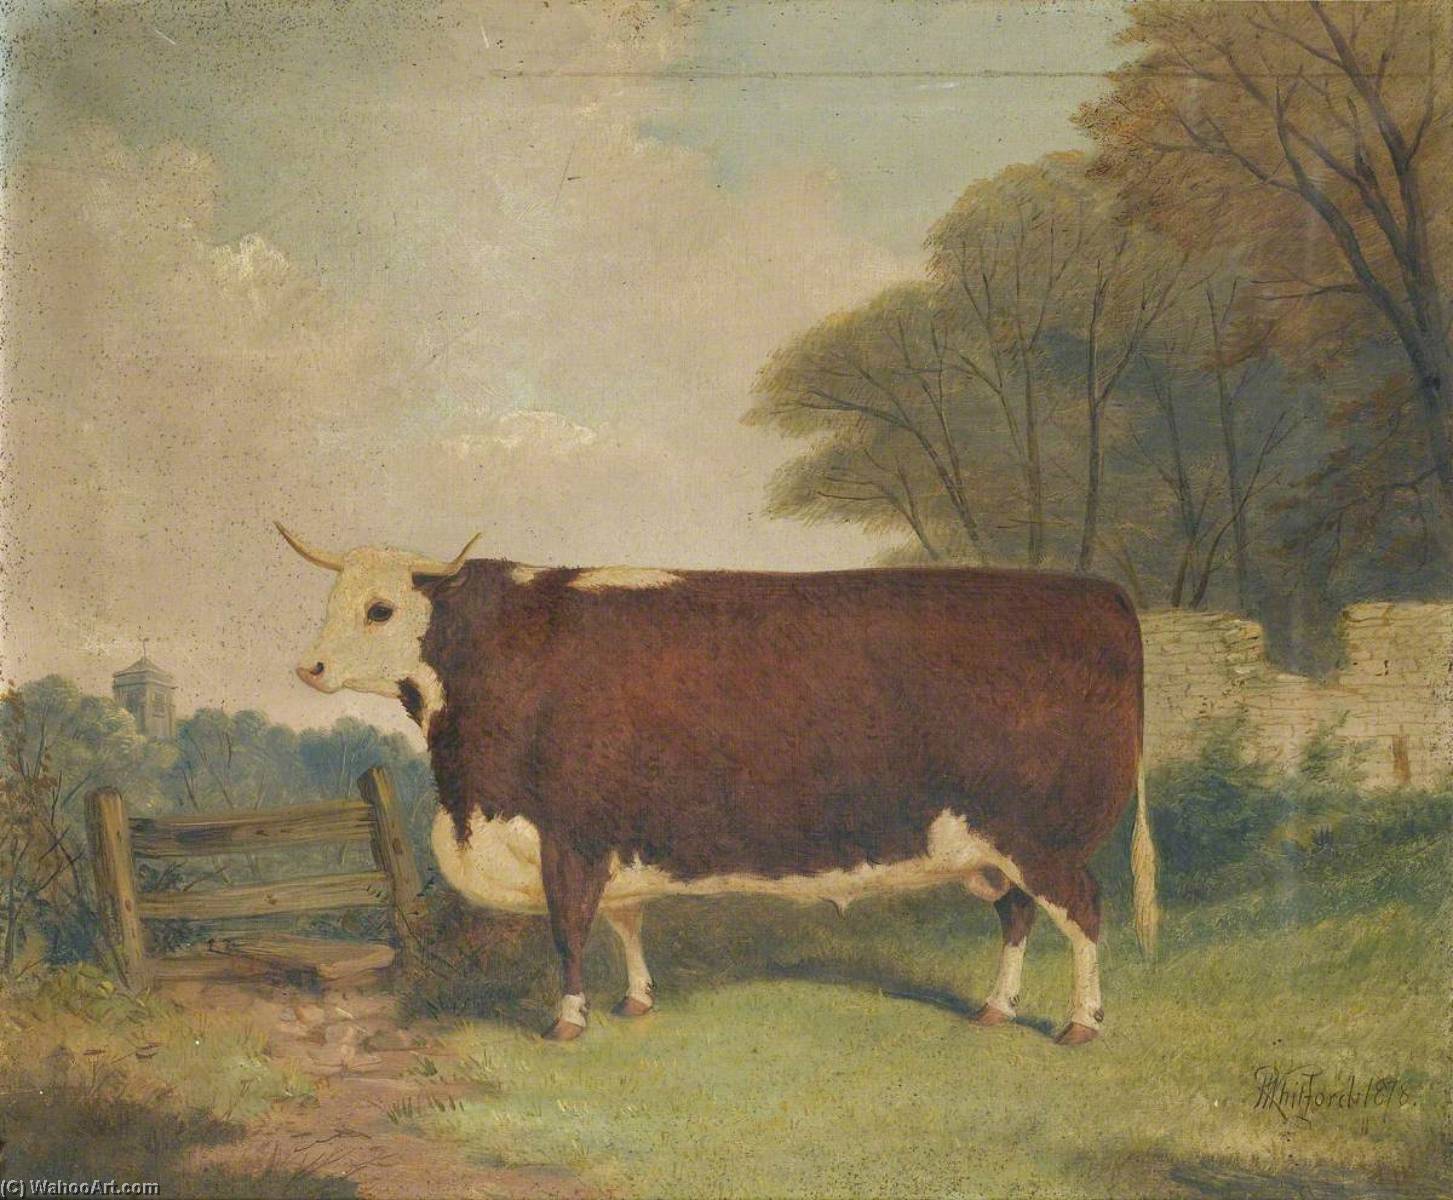 Buy Museum Art Reproductions A Prize Cow by a Gate, 1878 by Richard Whitford (1821-1890) | ArtsDot.com